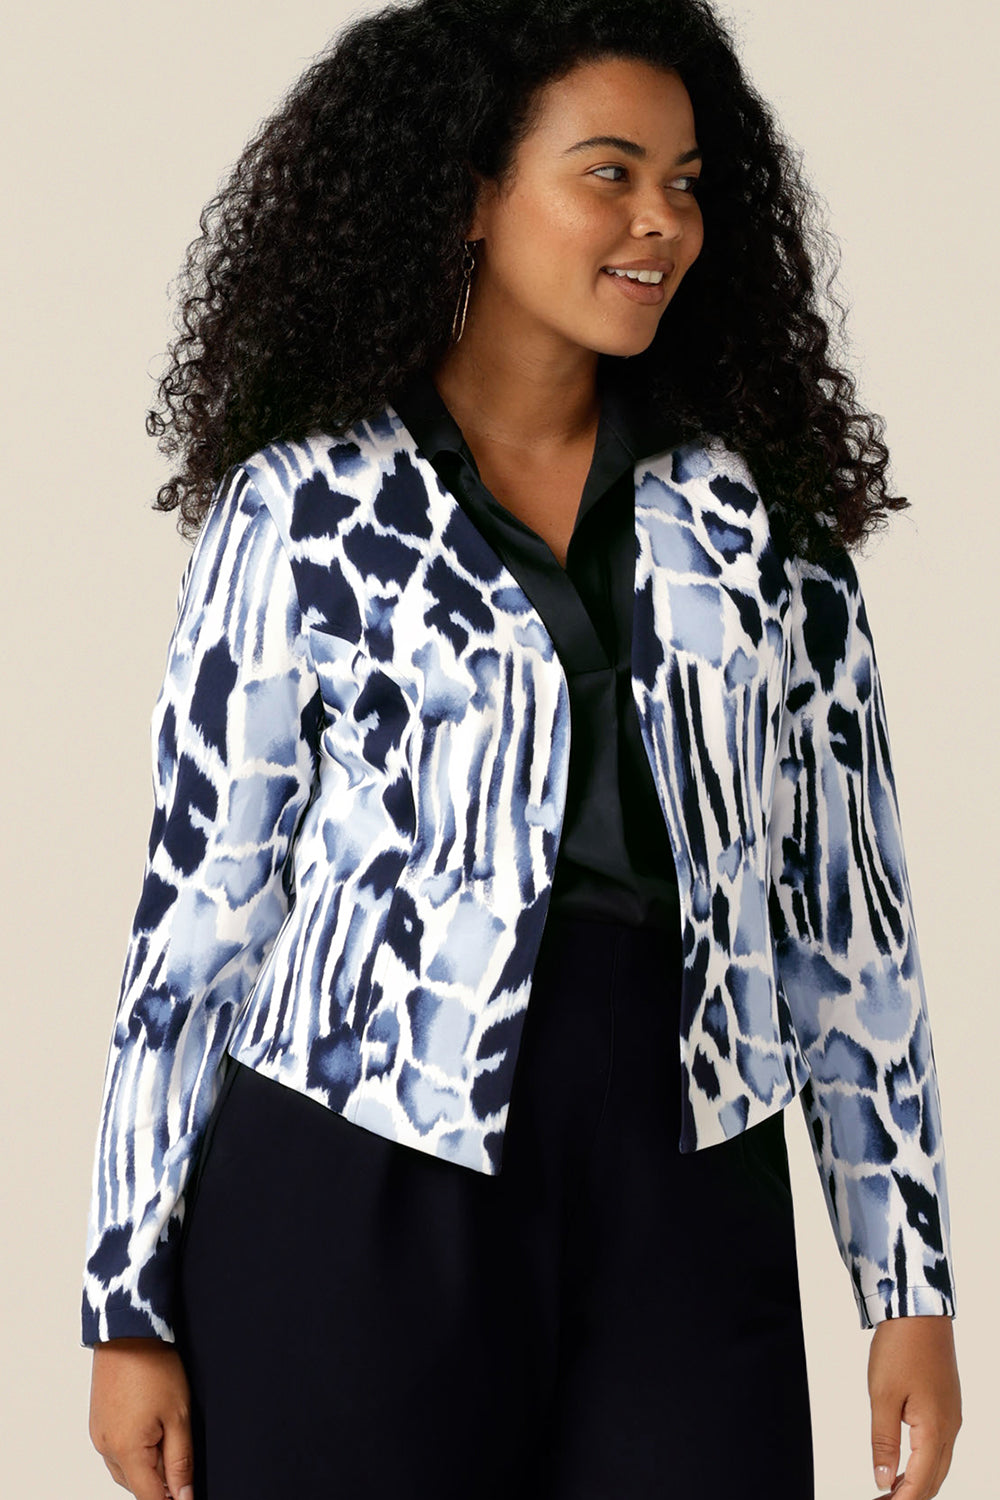 A size 12, curvy woman wears a collarless open front jacket for work and corporate wear. In navy and white jersey, this is a tailored jacket with stretch for all-day wear as a comfortable office jacket. Styled with a navy blue shirt and navy pants, this women's corporate jacket completes the work wear outfit.